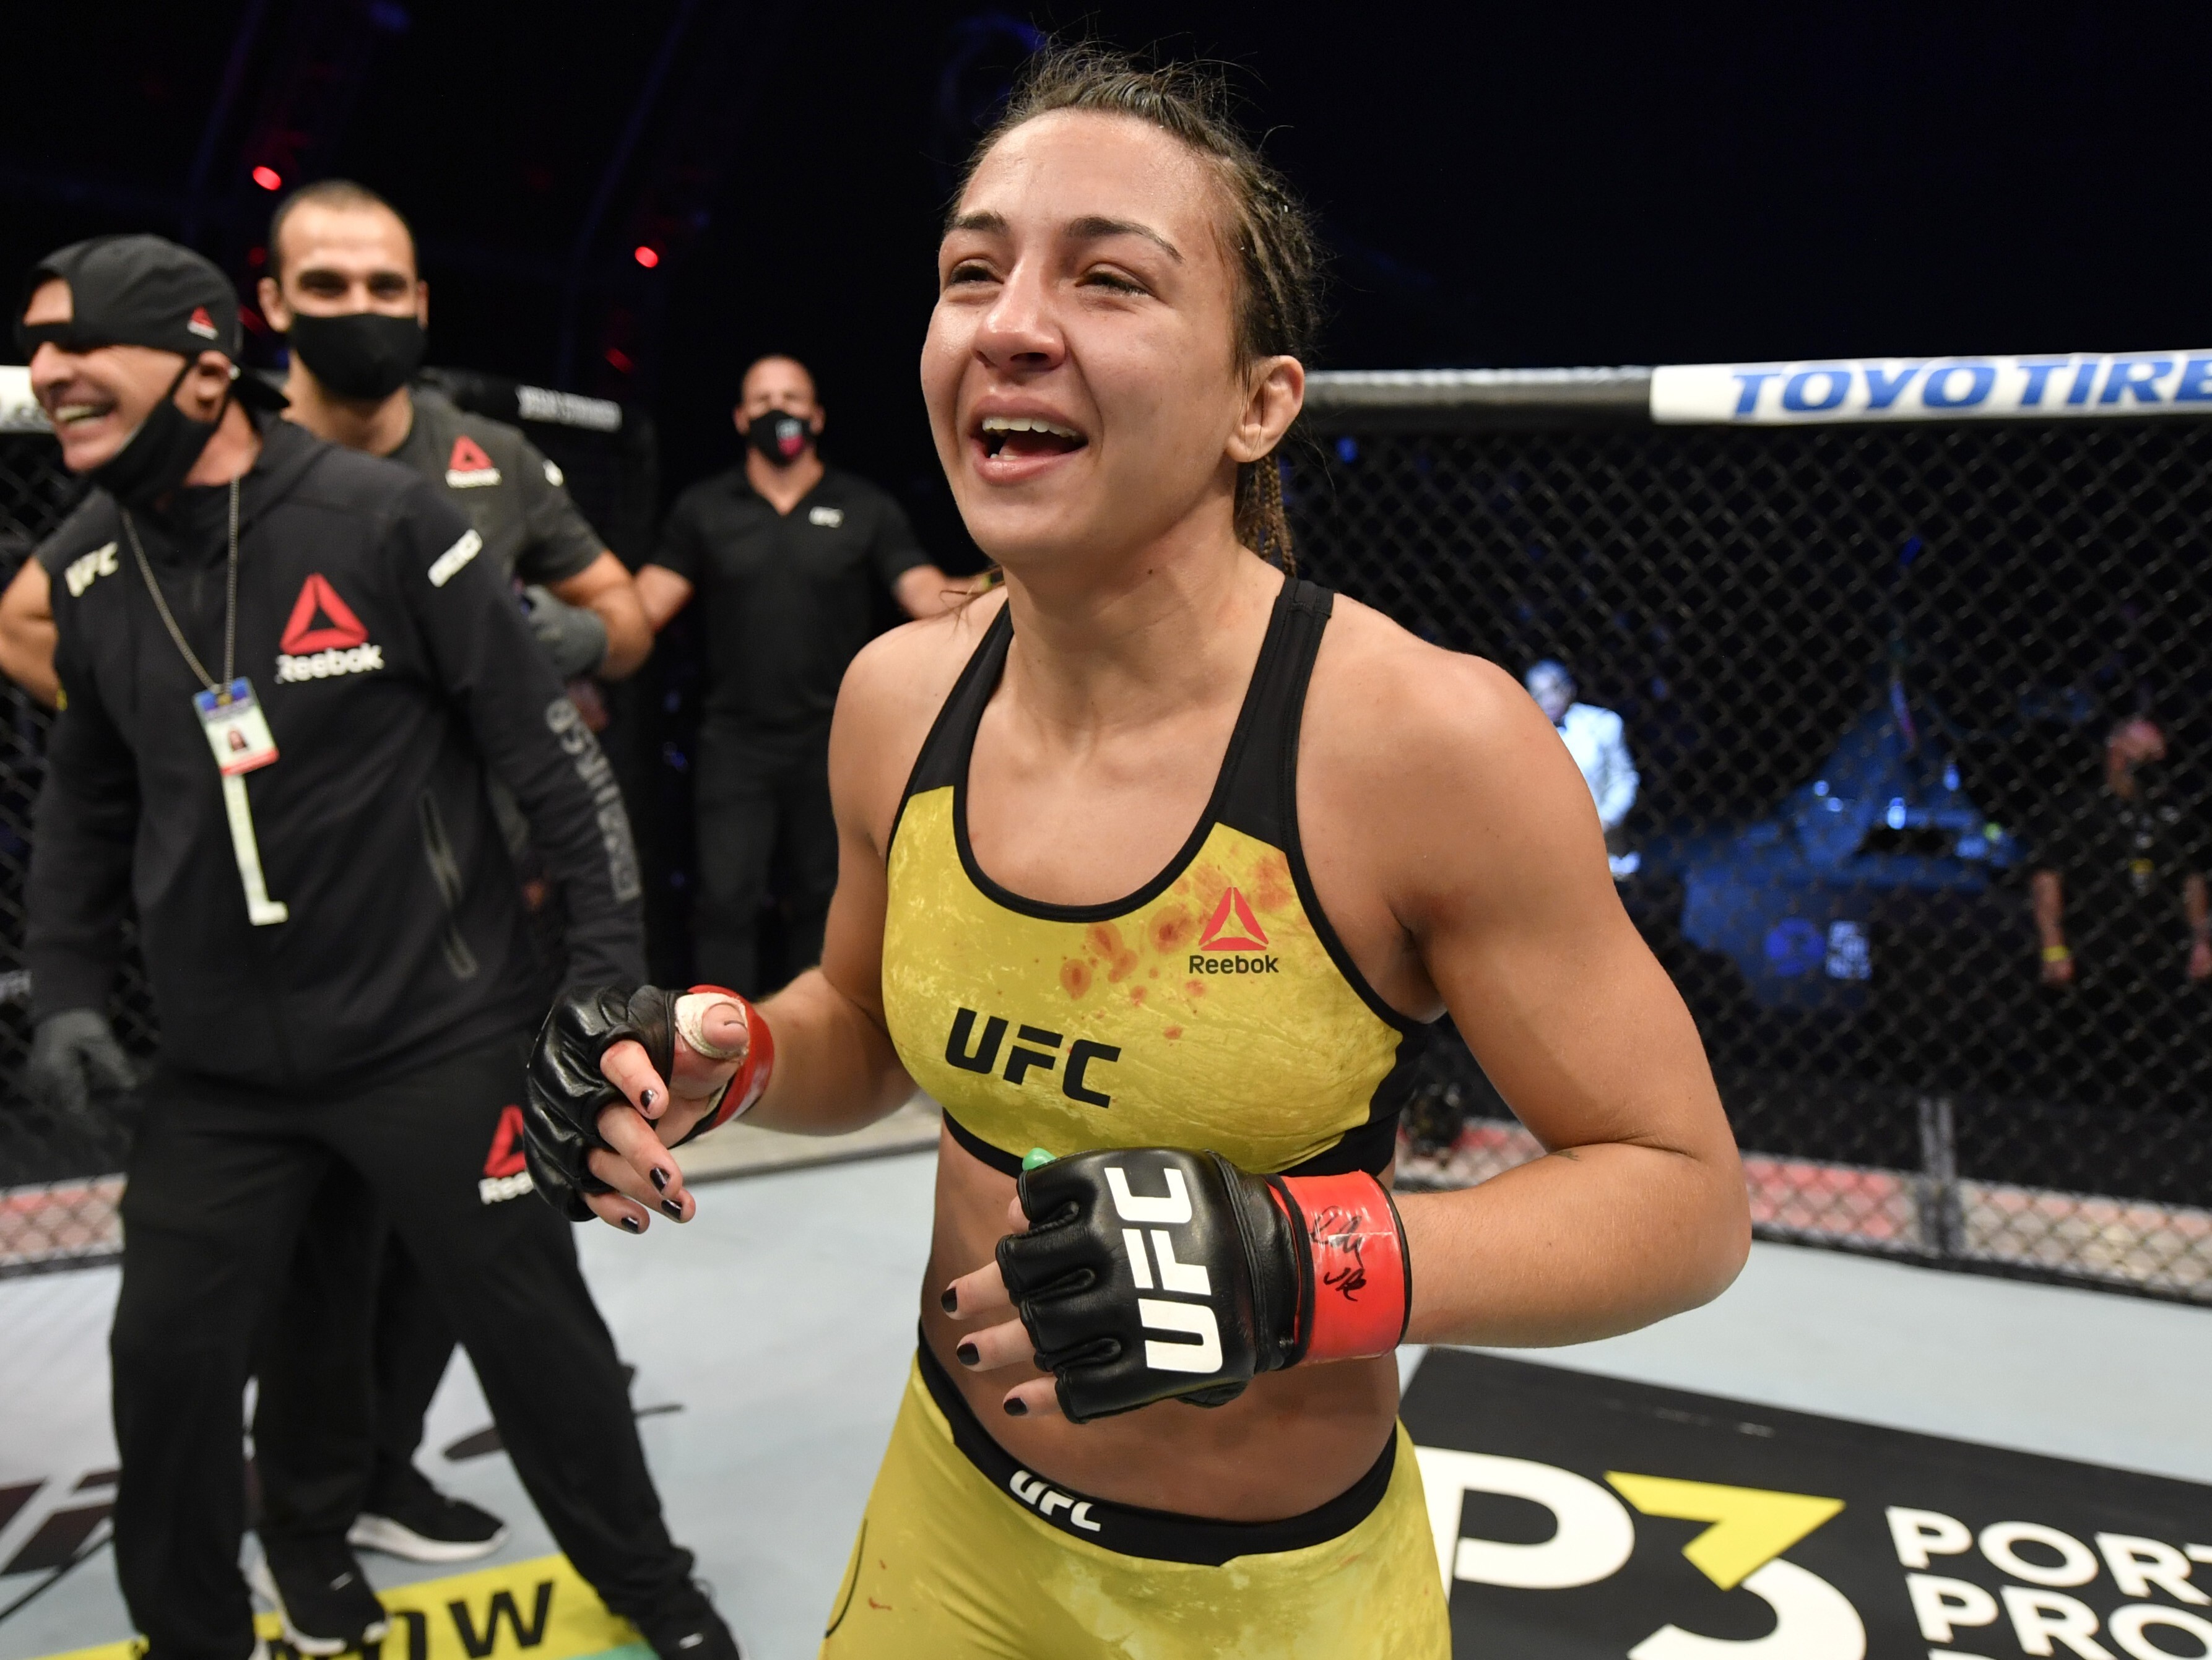 Brazil’s Amanda Ribas celebrates her victory over Paige VanZant in their flyweight fight during UFC 251 in Abu Dhabi. Photo: USA TODAY Sports